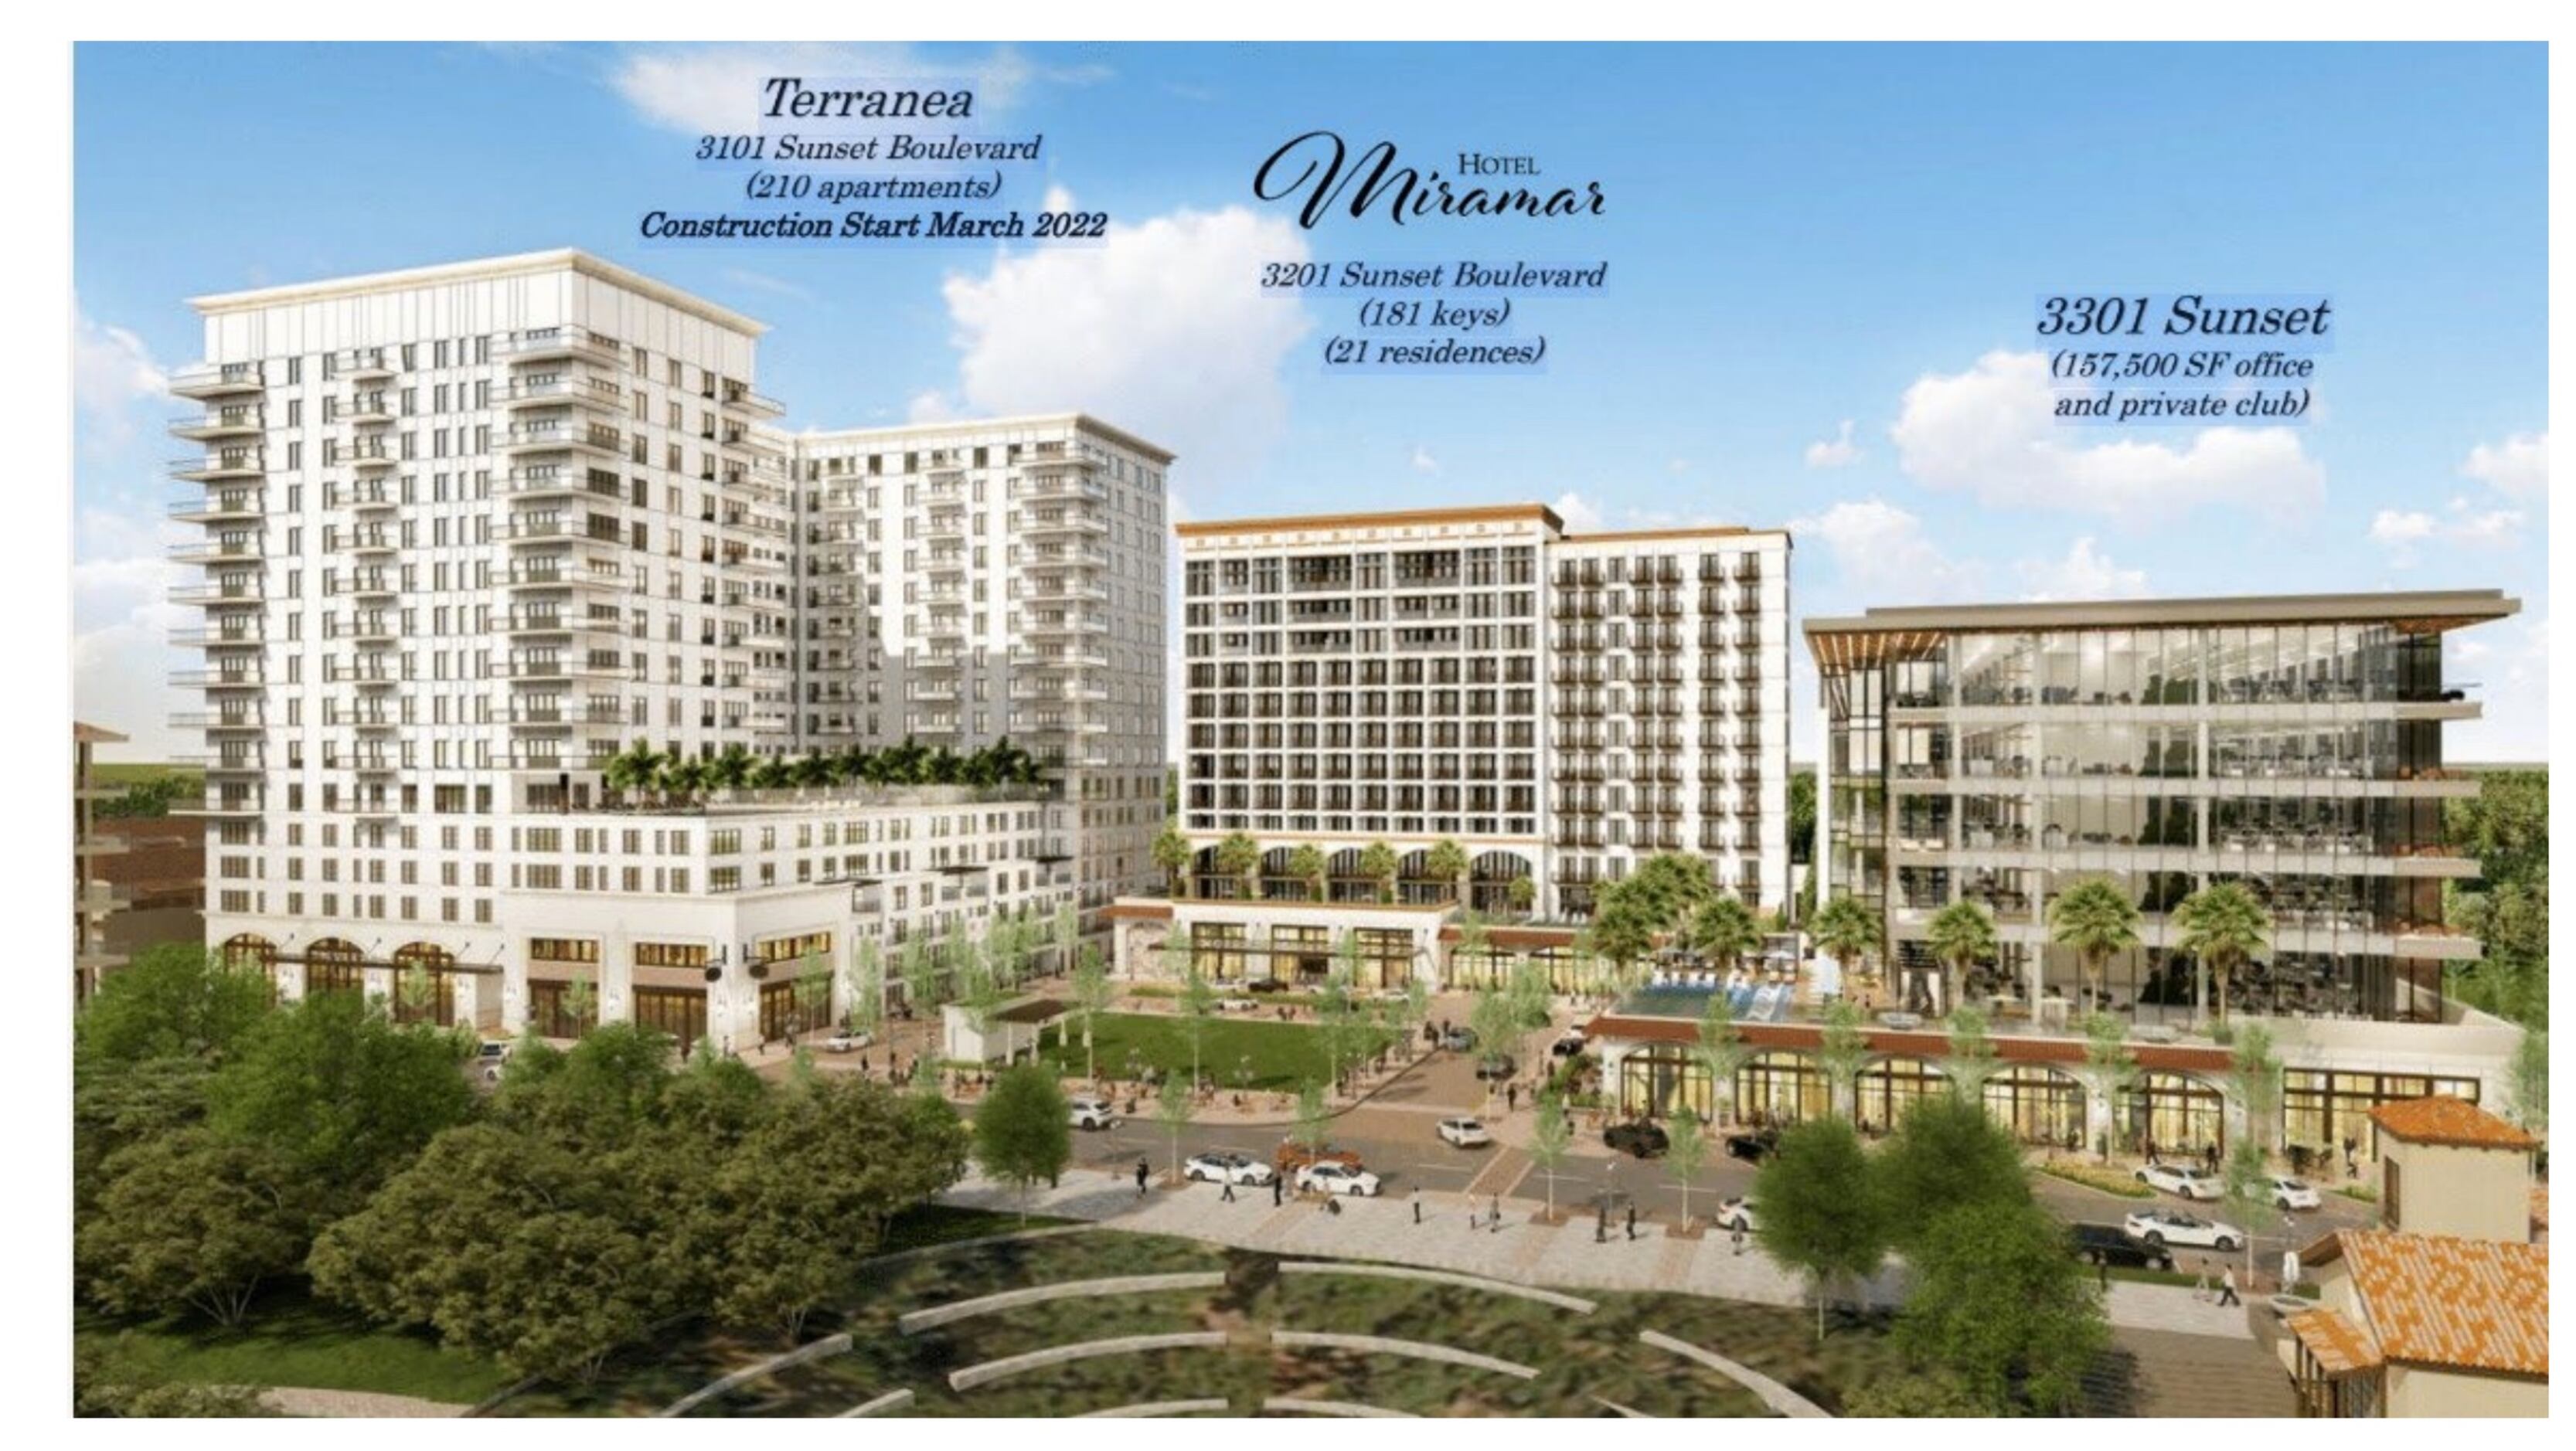 Florida lakeside project with luxury apartments, village market